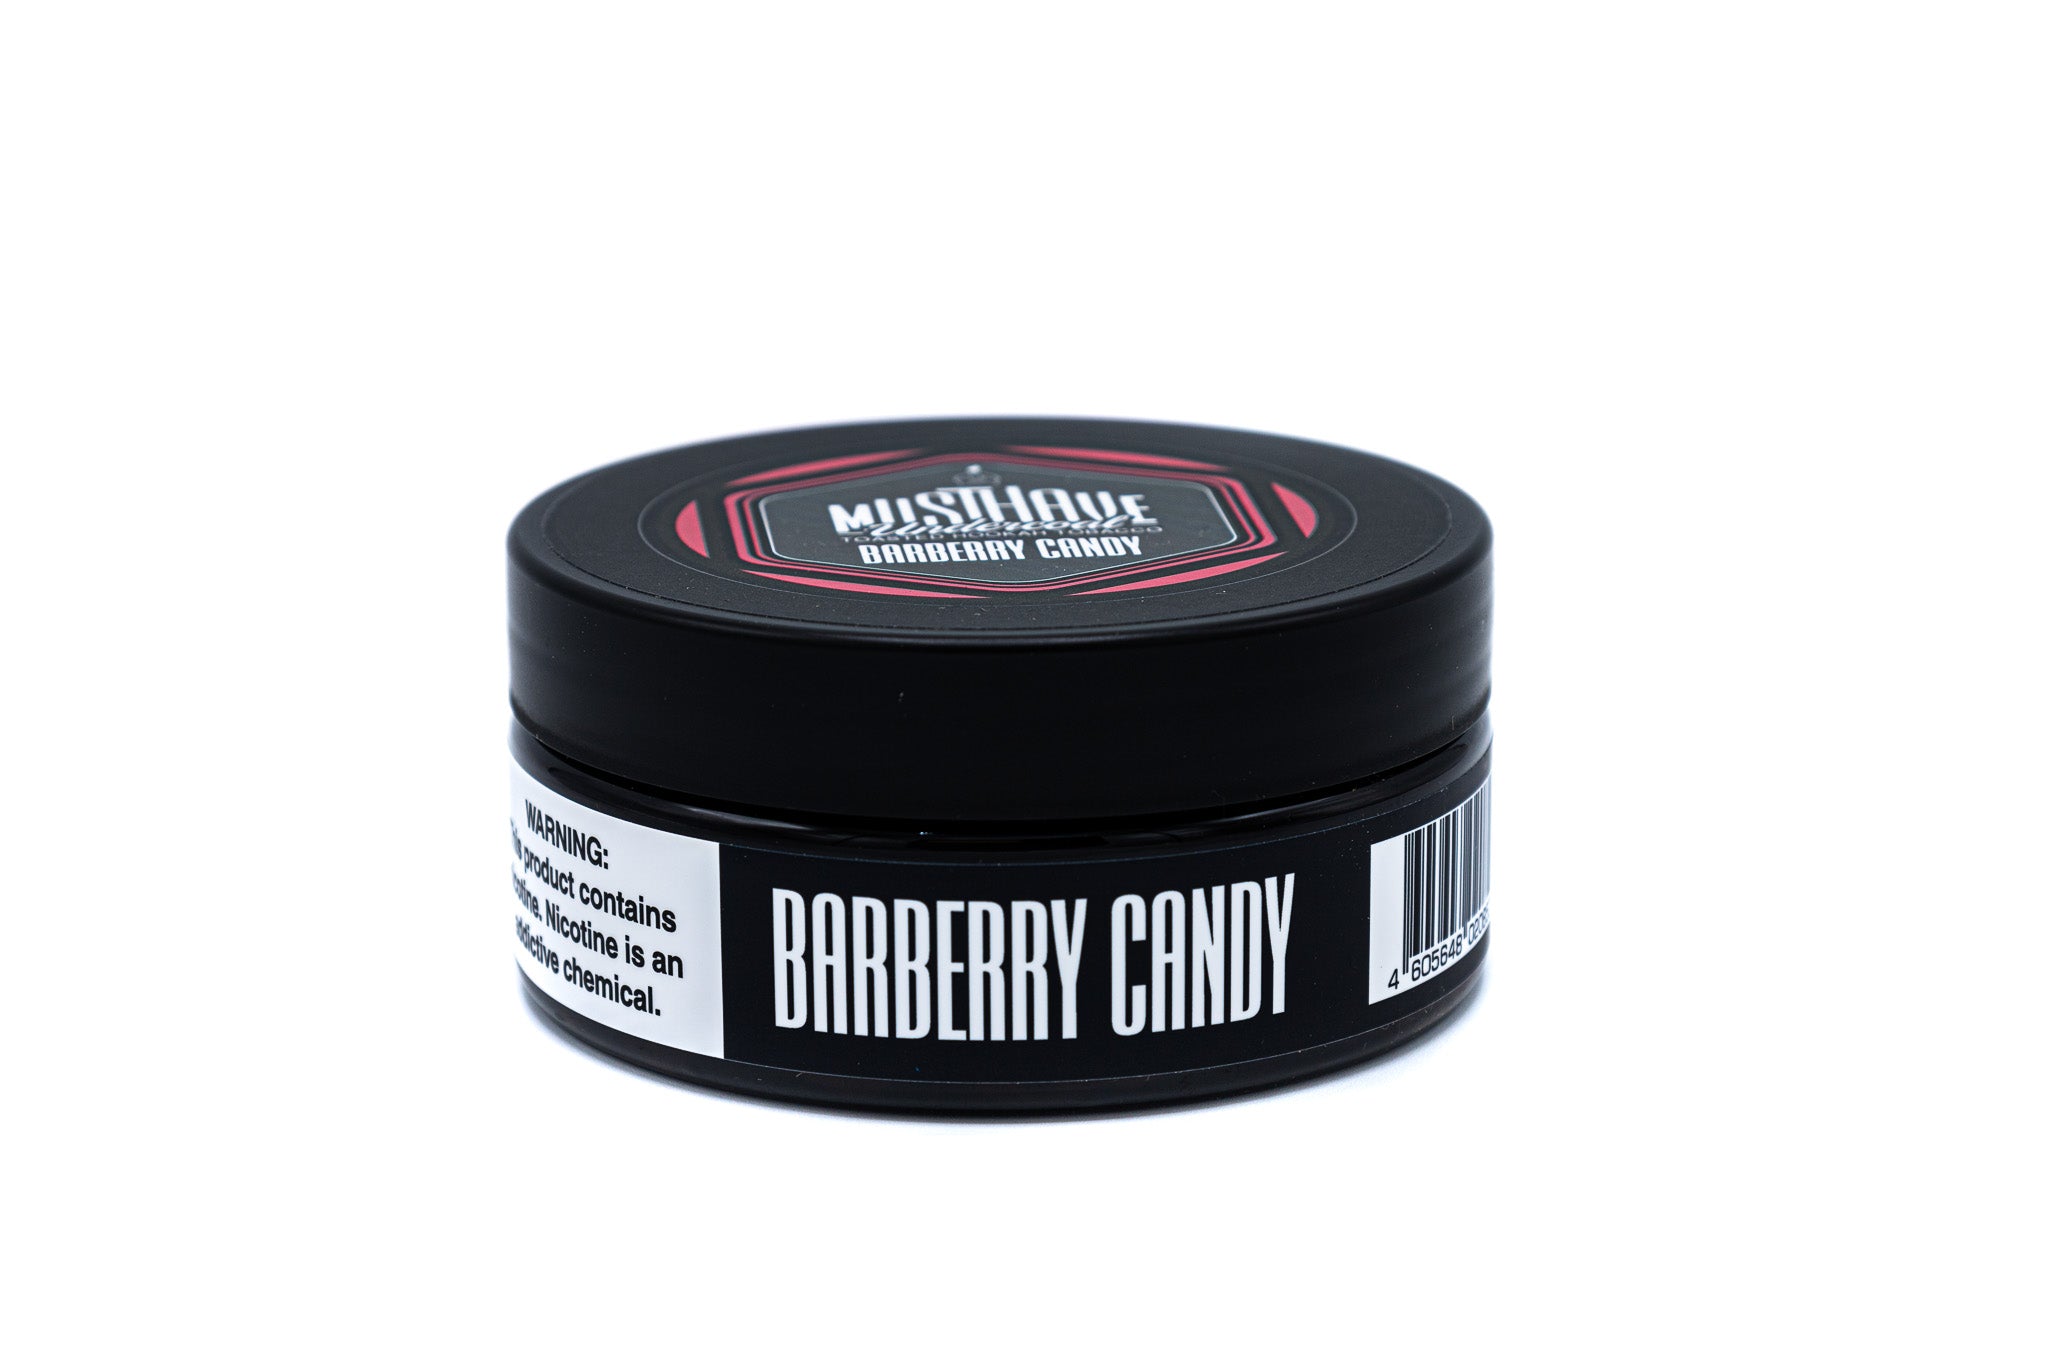 Musthave Barberry Candy 125G - Smoxygen